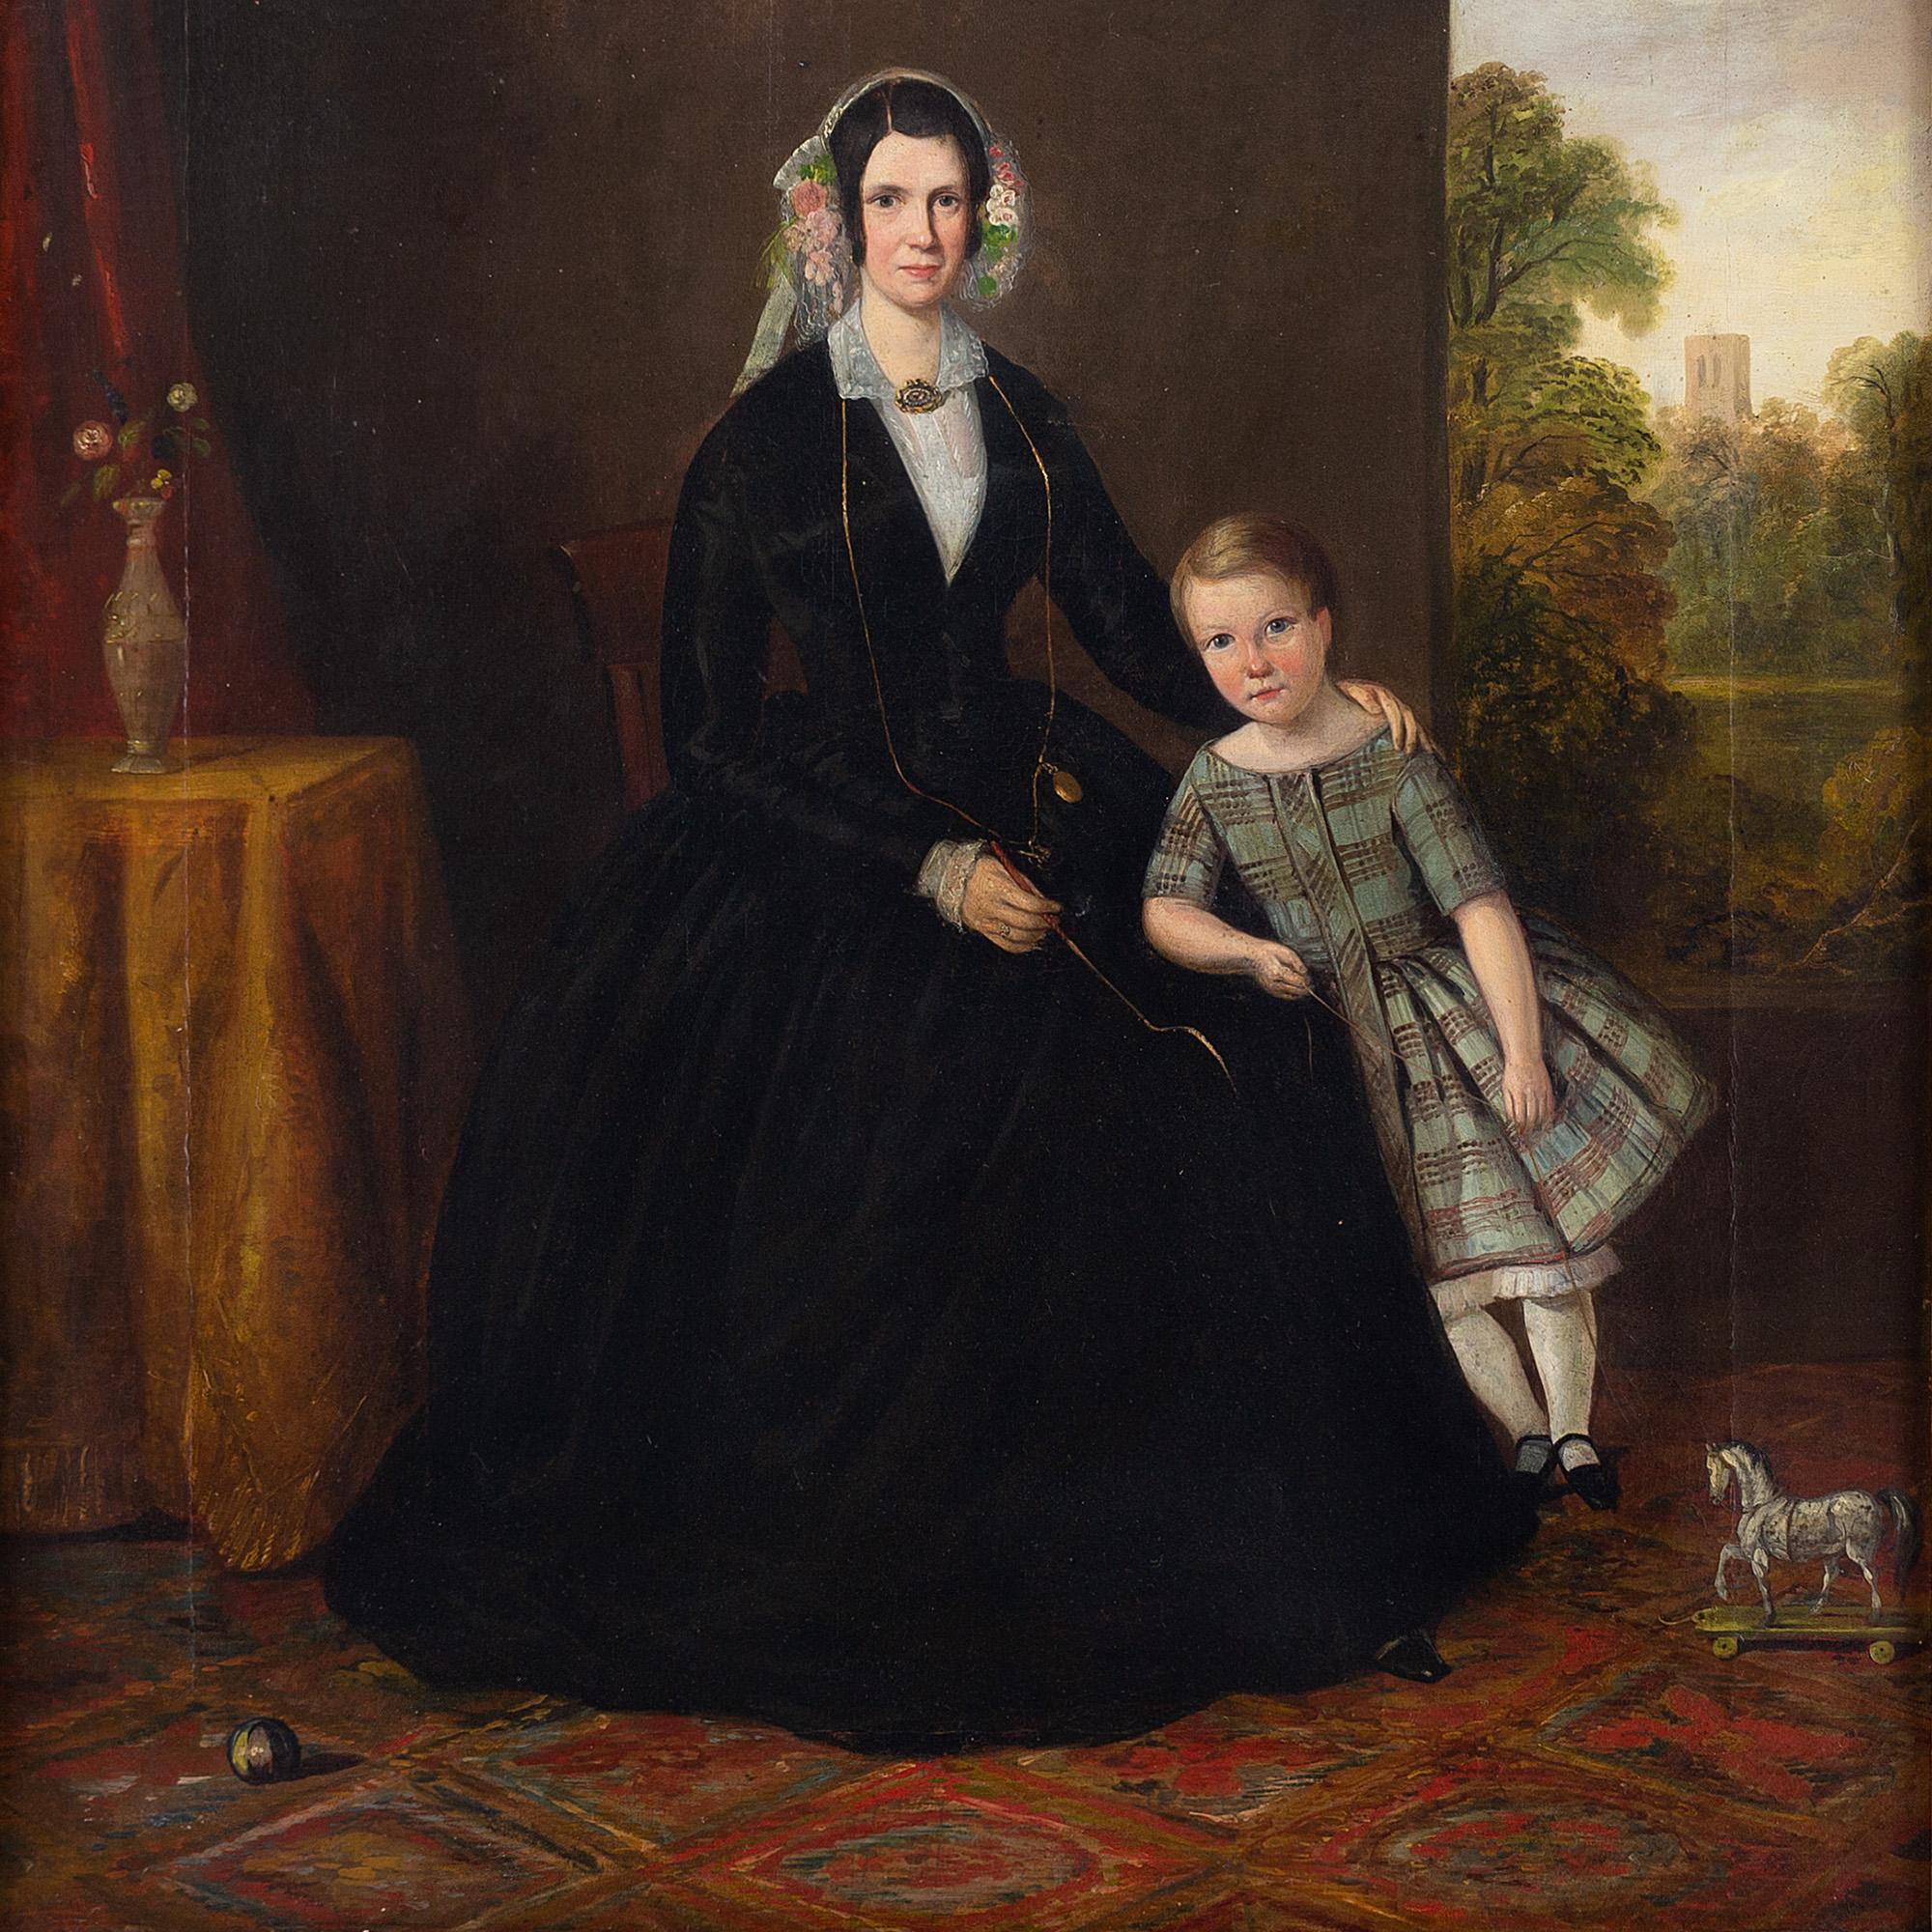 This 19th-century provincial portrait depicts a mother and child sitting within a country house interior.

It’s an interesting piece with various symbolic references. Note the toy horse - a likely reminder that the boy is the next in line to inherit